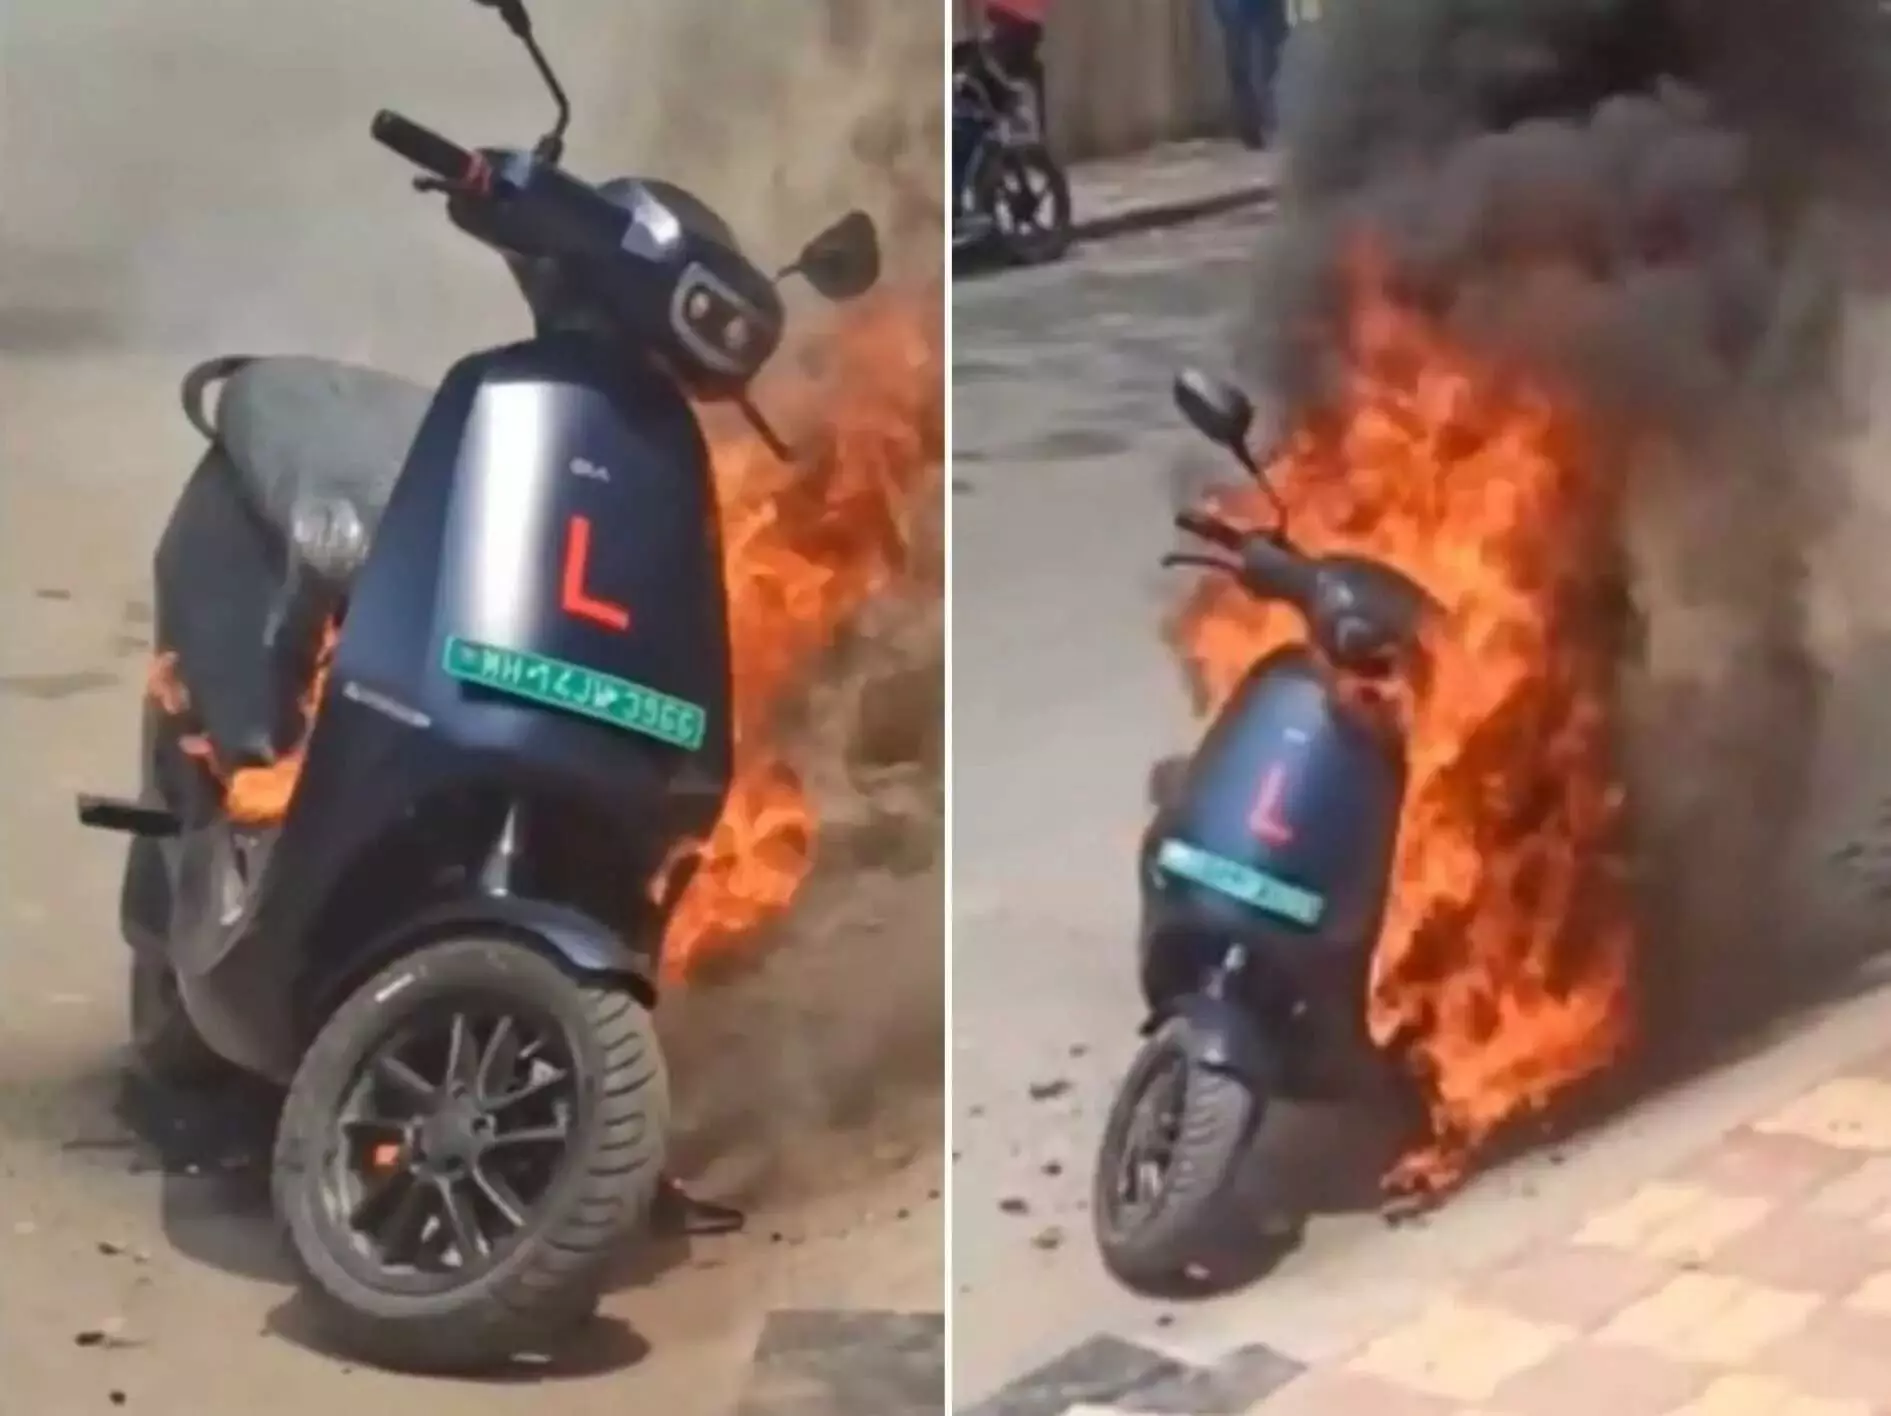 Ola S1 pro electric scooter catches fire in Pune, company says investigation on